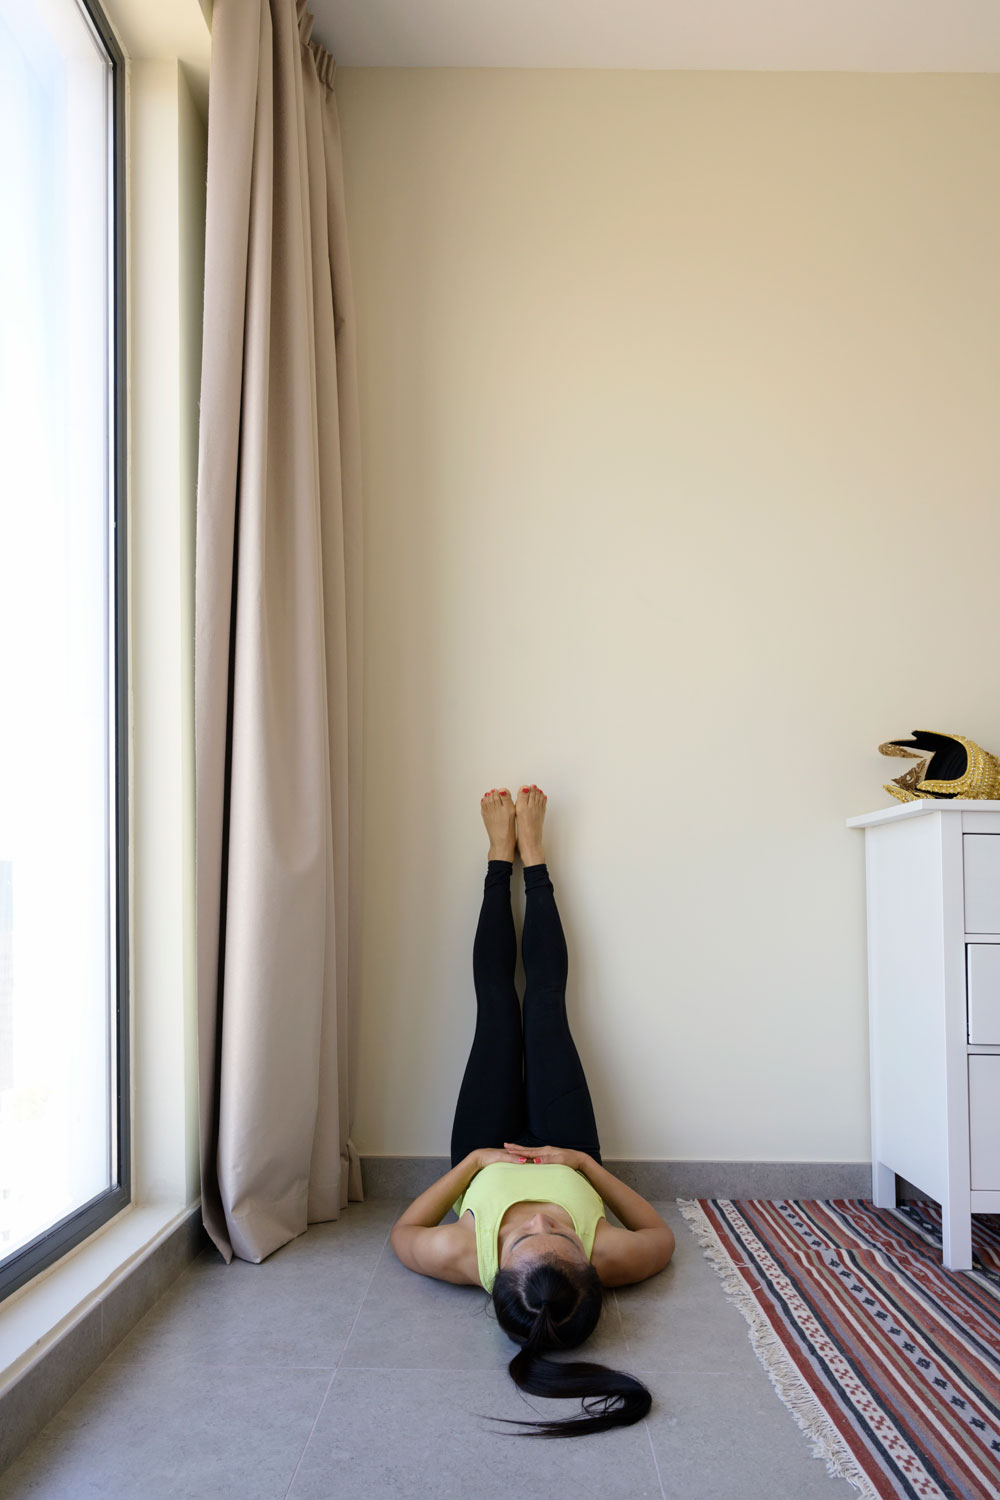 Is Wall Pilates A Good Workout?